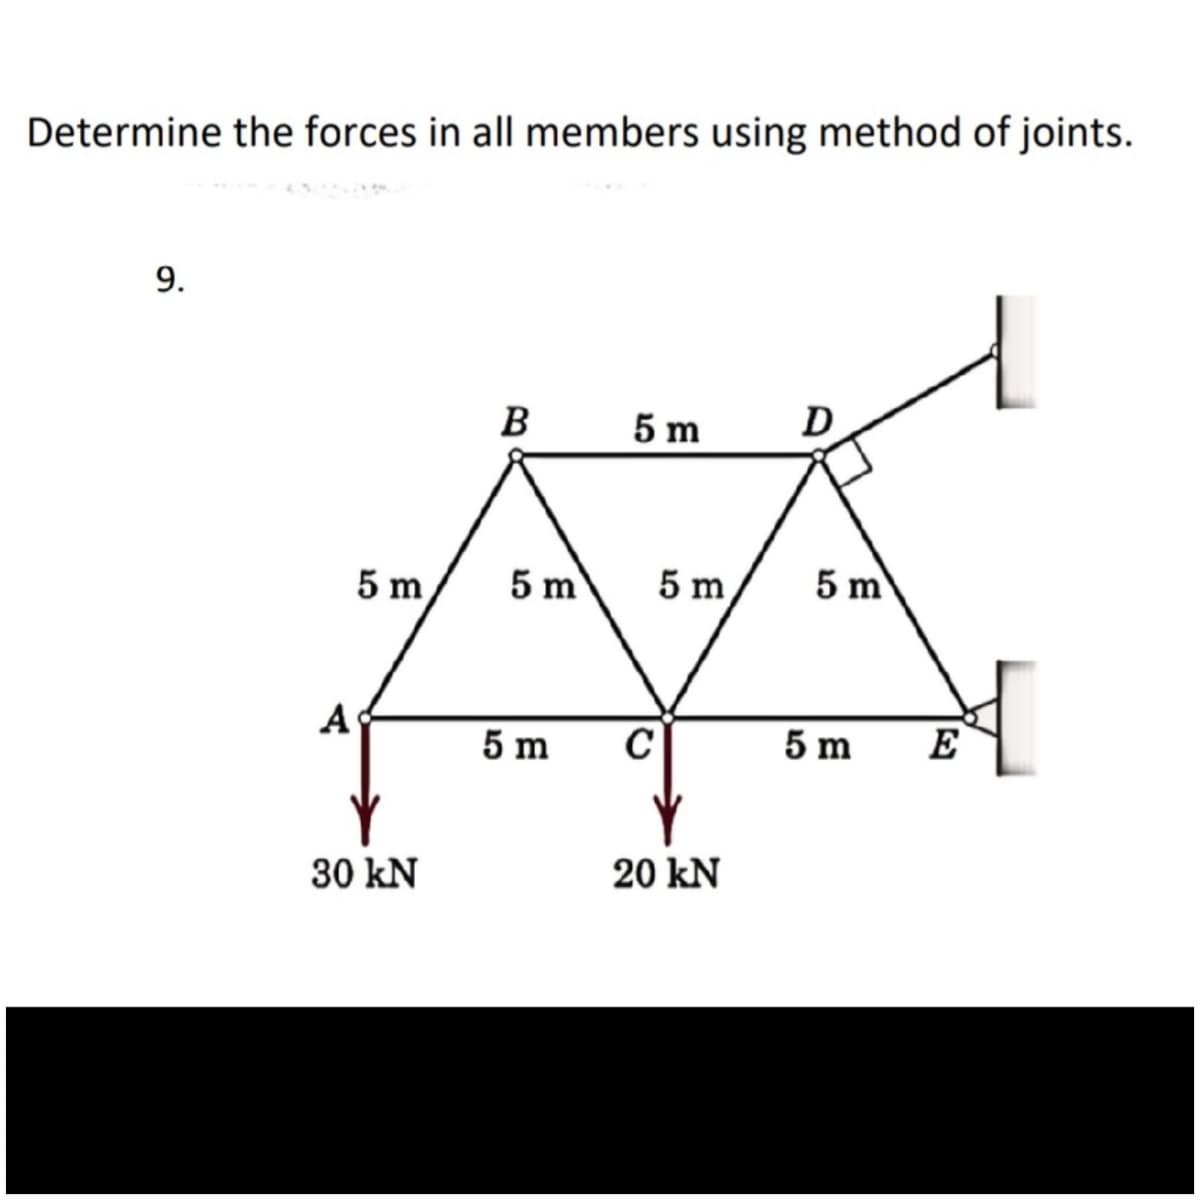 Determine the forces in all members using method of joints.
9.
B
5 m
D
5 m
A
30 kN
5 m
5 m
5 m
20 kN
5 m
5 m
E